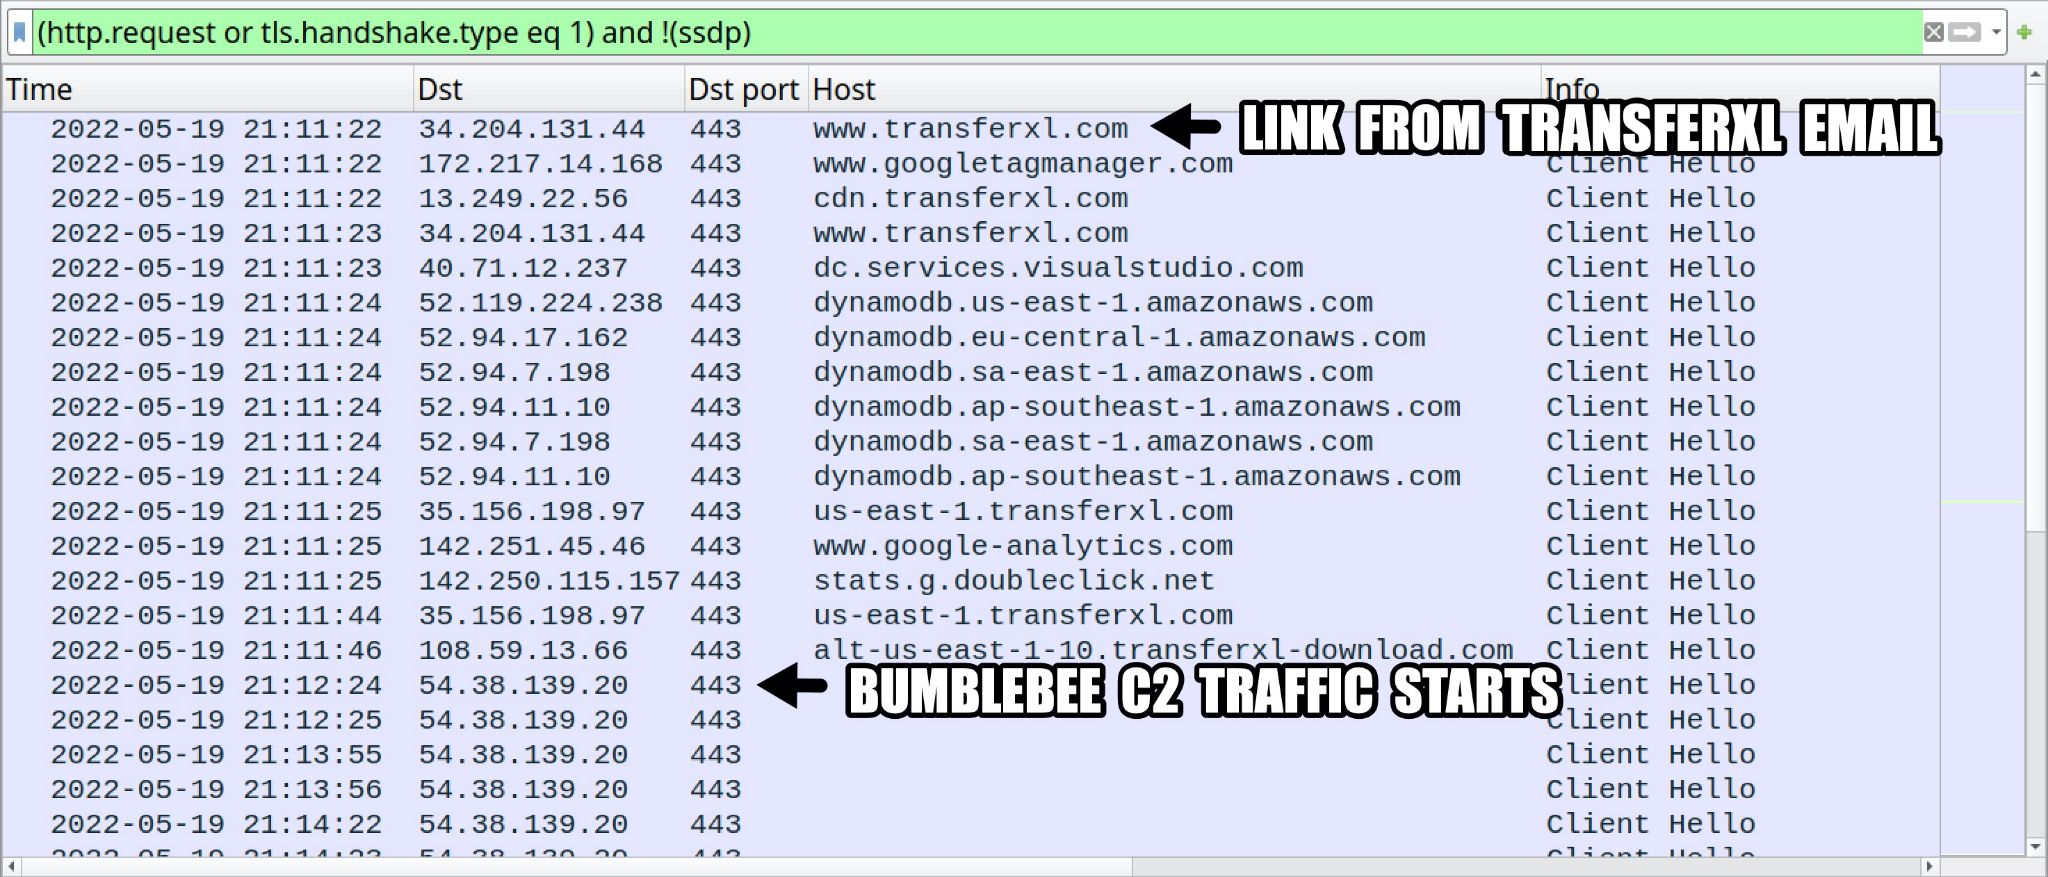 Traffic from the infection filtered in Wireshark. An arrow points to the link from the TransferXL Email, and another points to where the Bumblebee C2 traffic starts. 